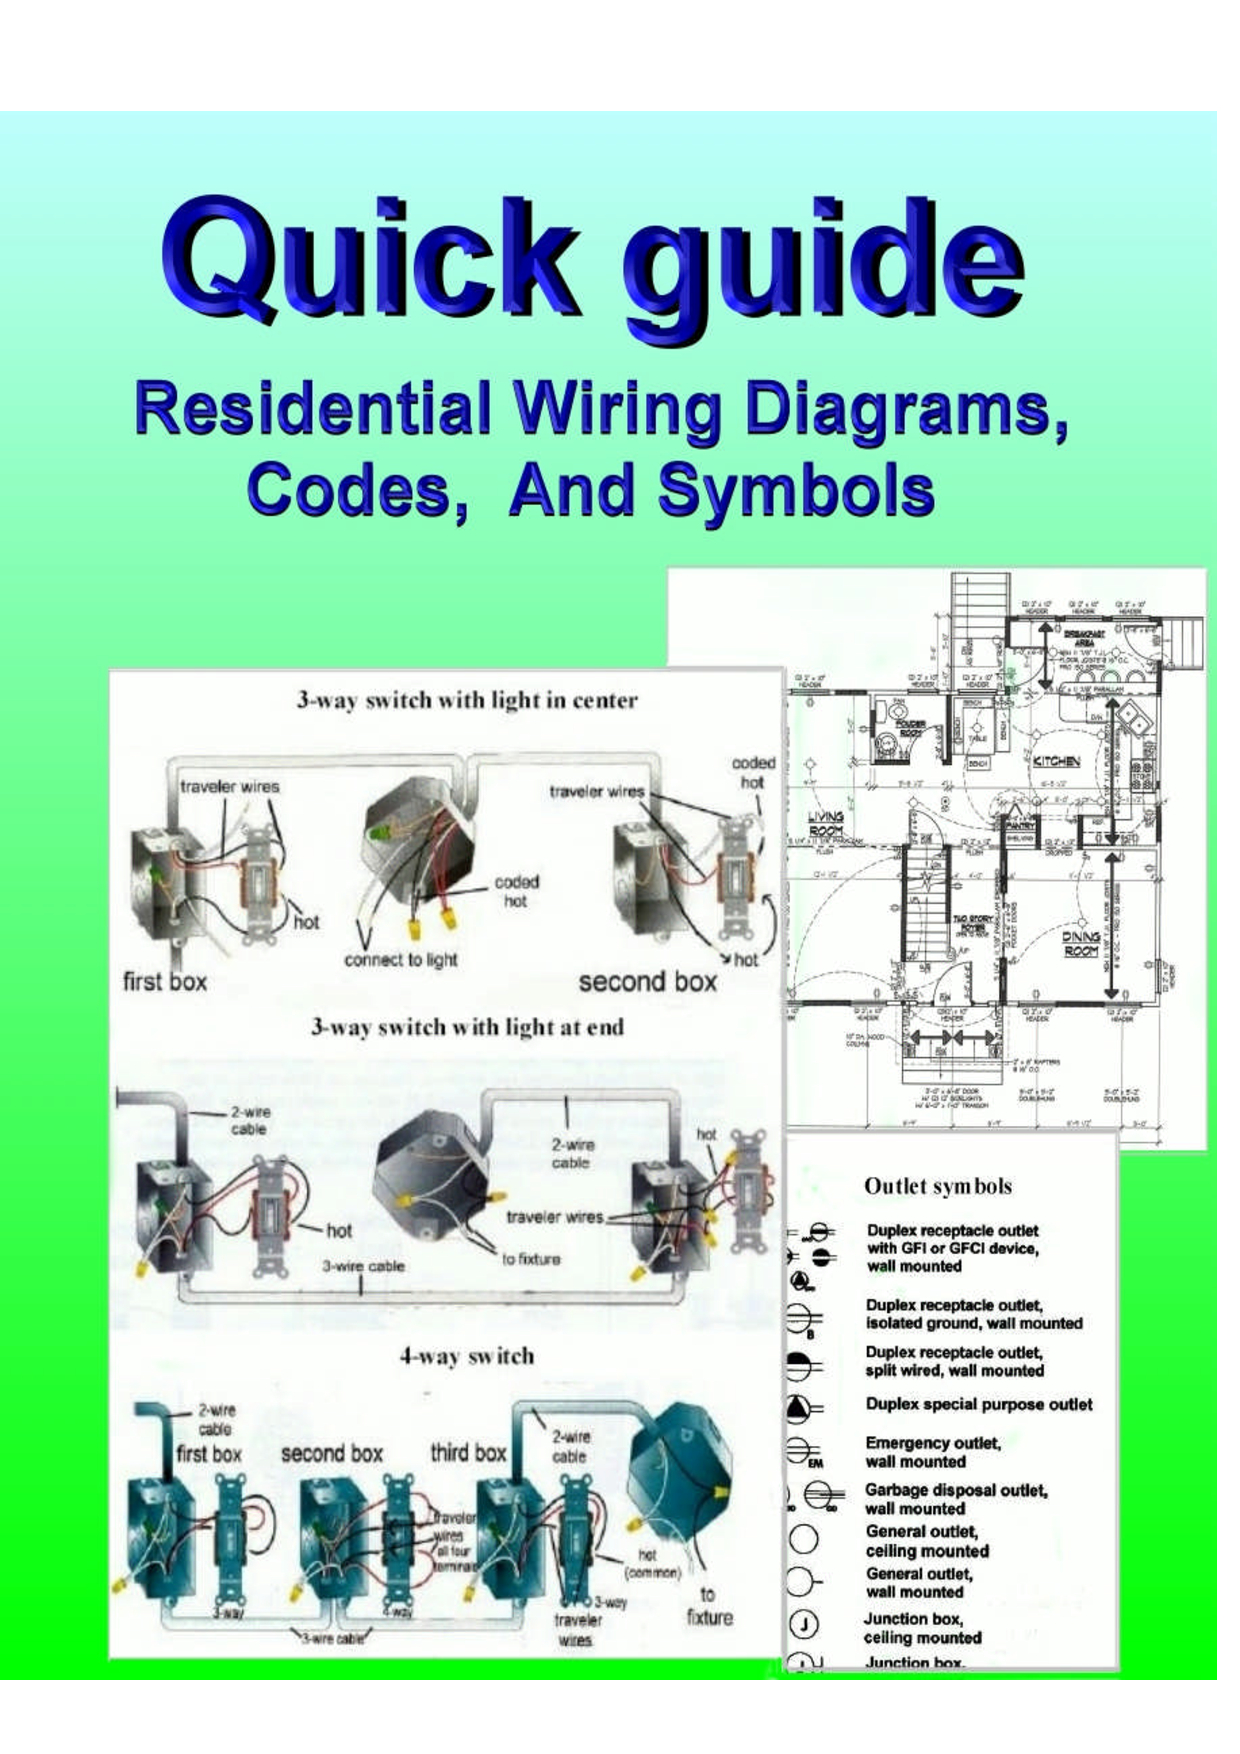 Home Electrical Wiring Diagrams.pdf Download Legal Documents 39 - Ac Wiring Diagram Pdf